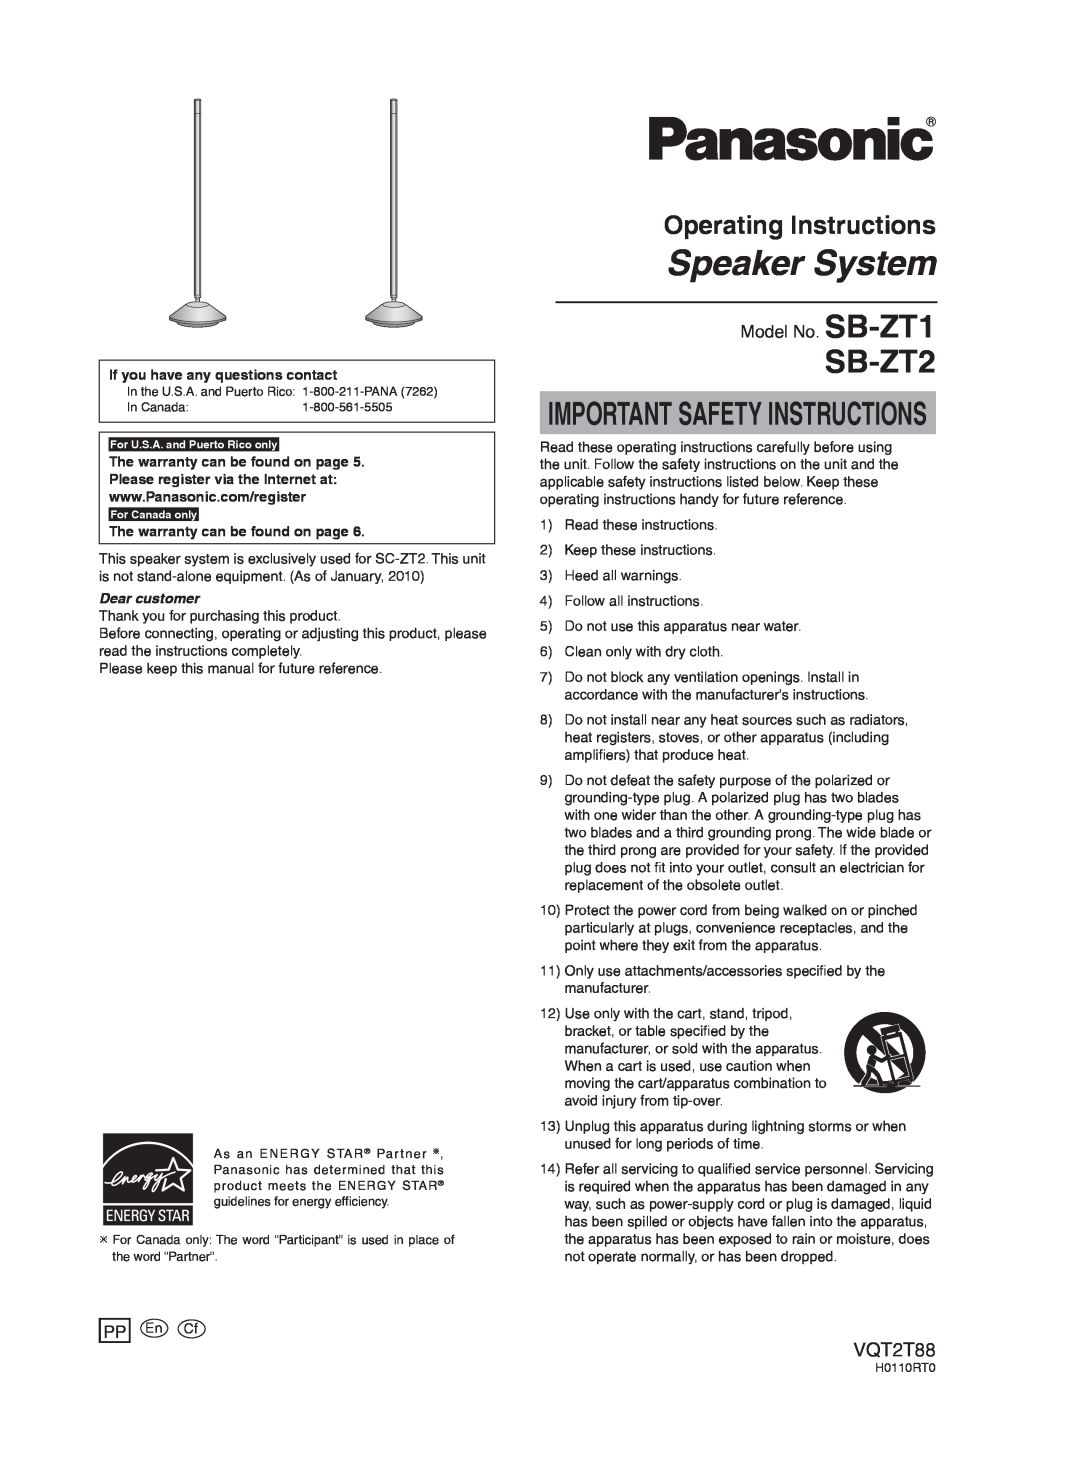 Panasonic SB-ZT2 important safety instructions If you have any questions contact, The warranty can be found on page 